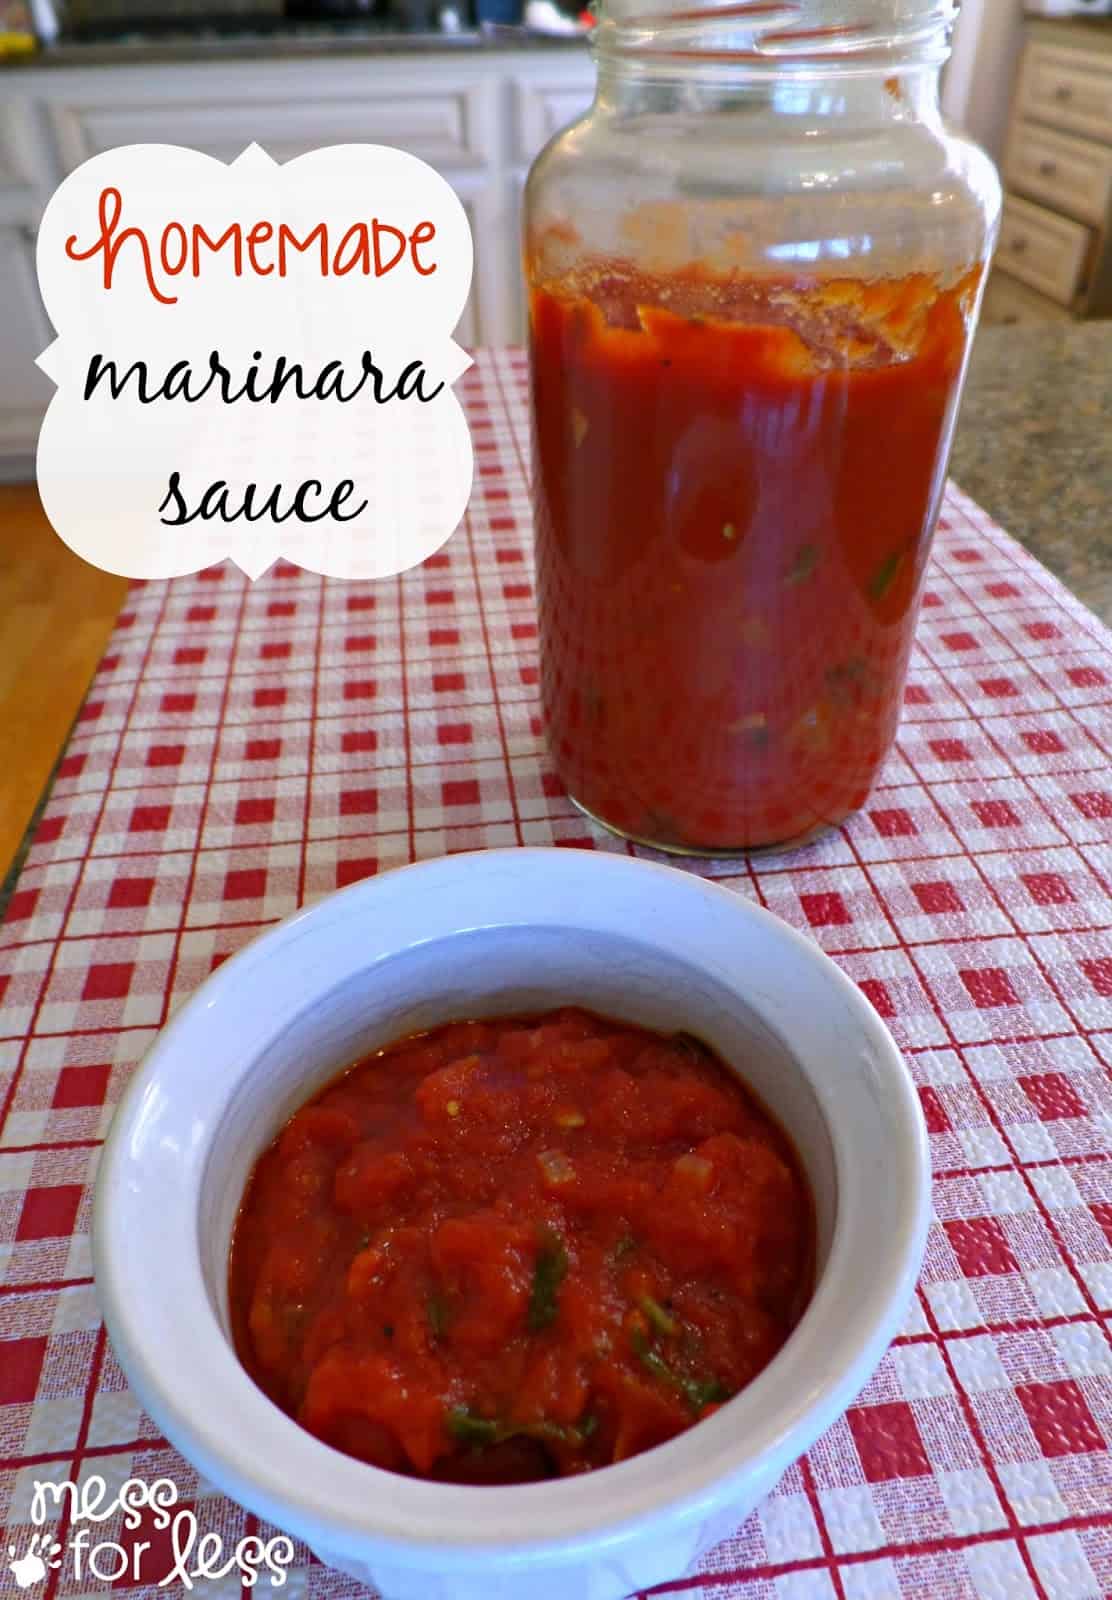 Homemade Marinara Sauce Recipe - this simple recipe will have you swearing off the store bought stuff! sponsored